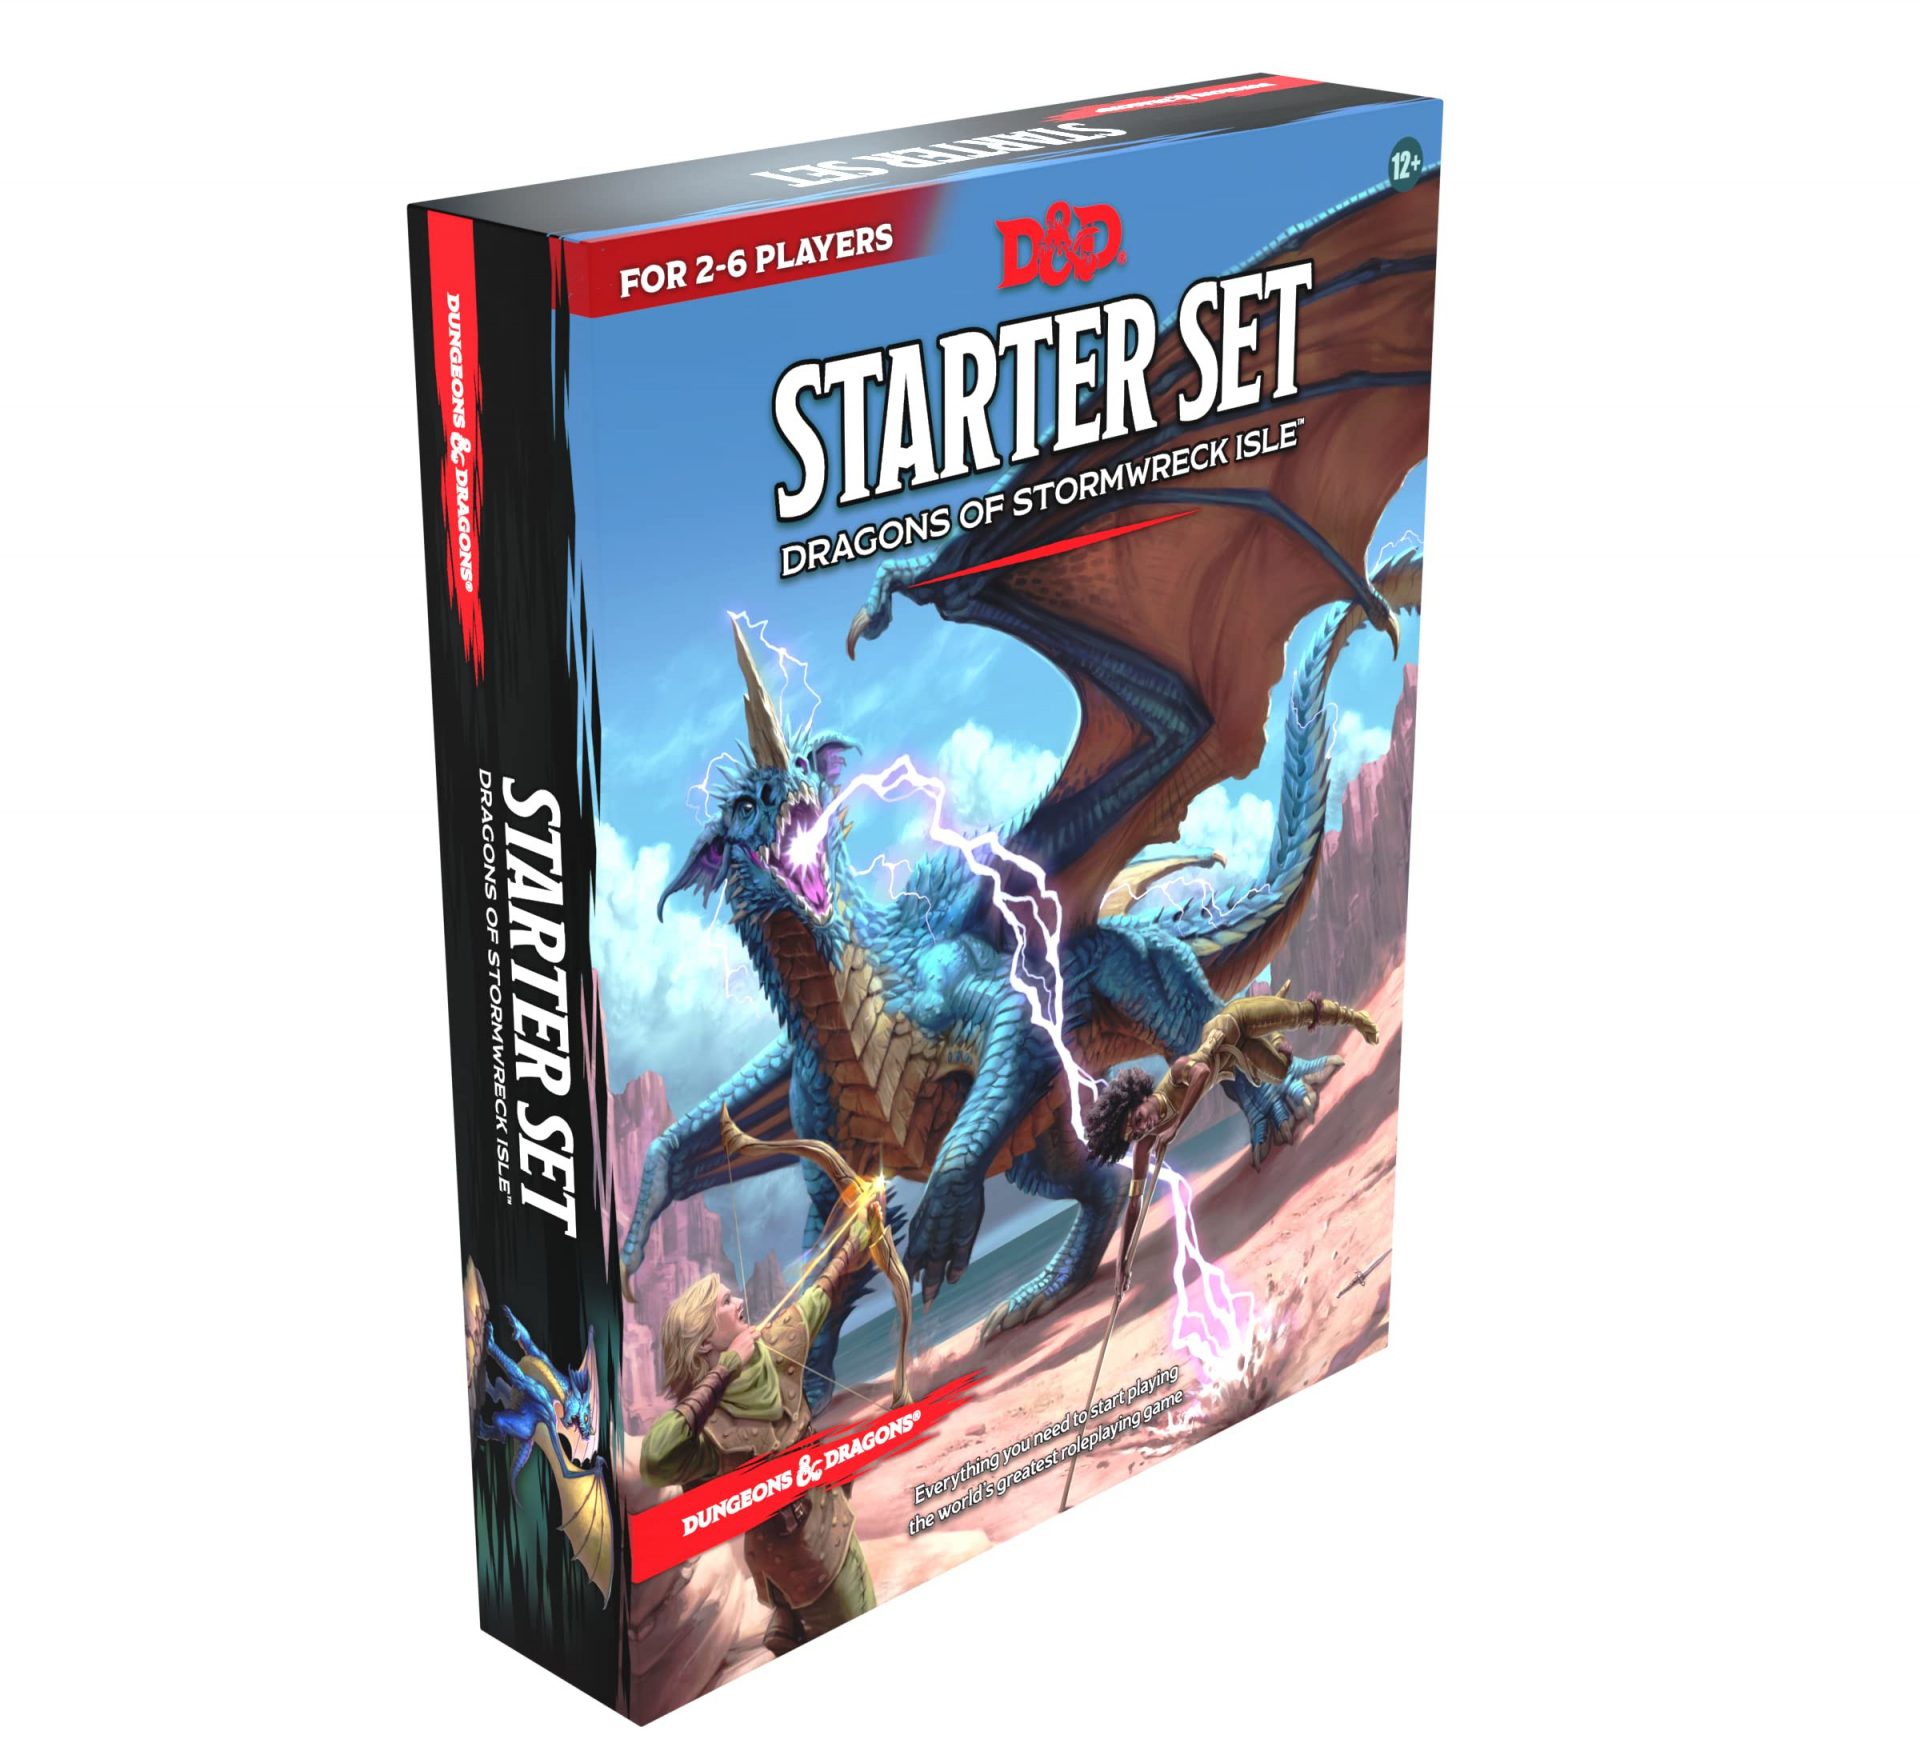 The box for Dungeons & Dragons Starter Set for Stormwreck Isle